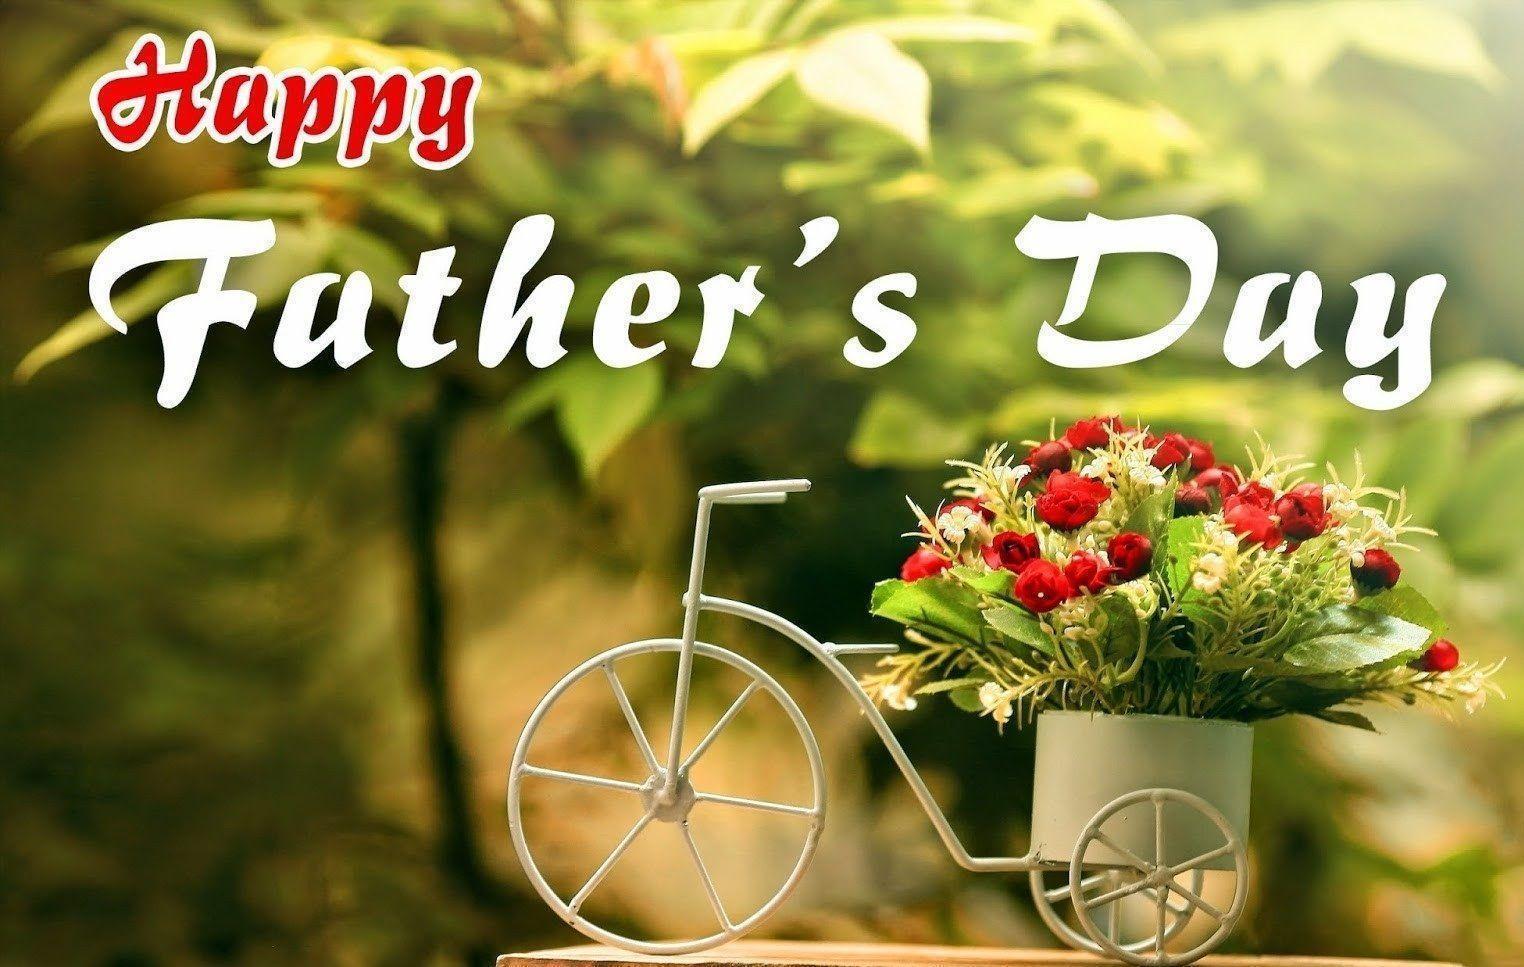 Happy fathers day 2017 picture, image, photo and wallpaper to